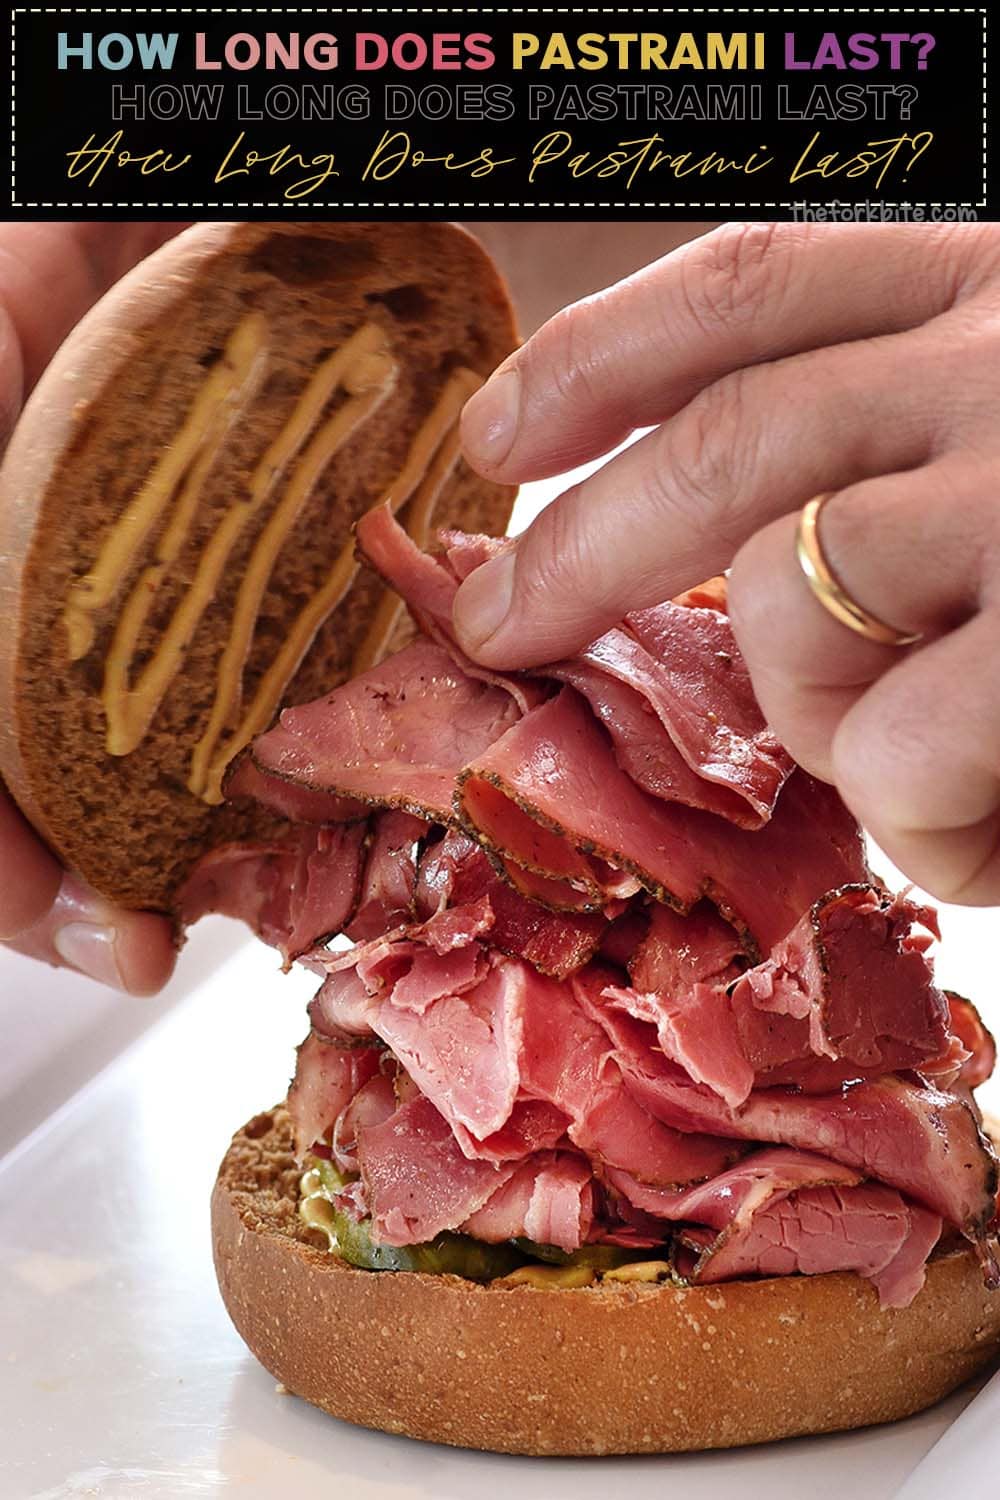 How Long Does Pastrami Last?